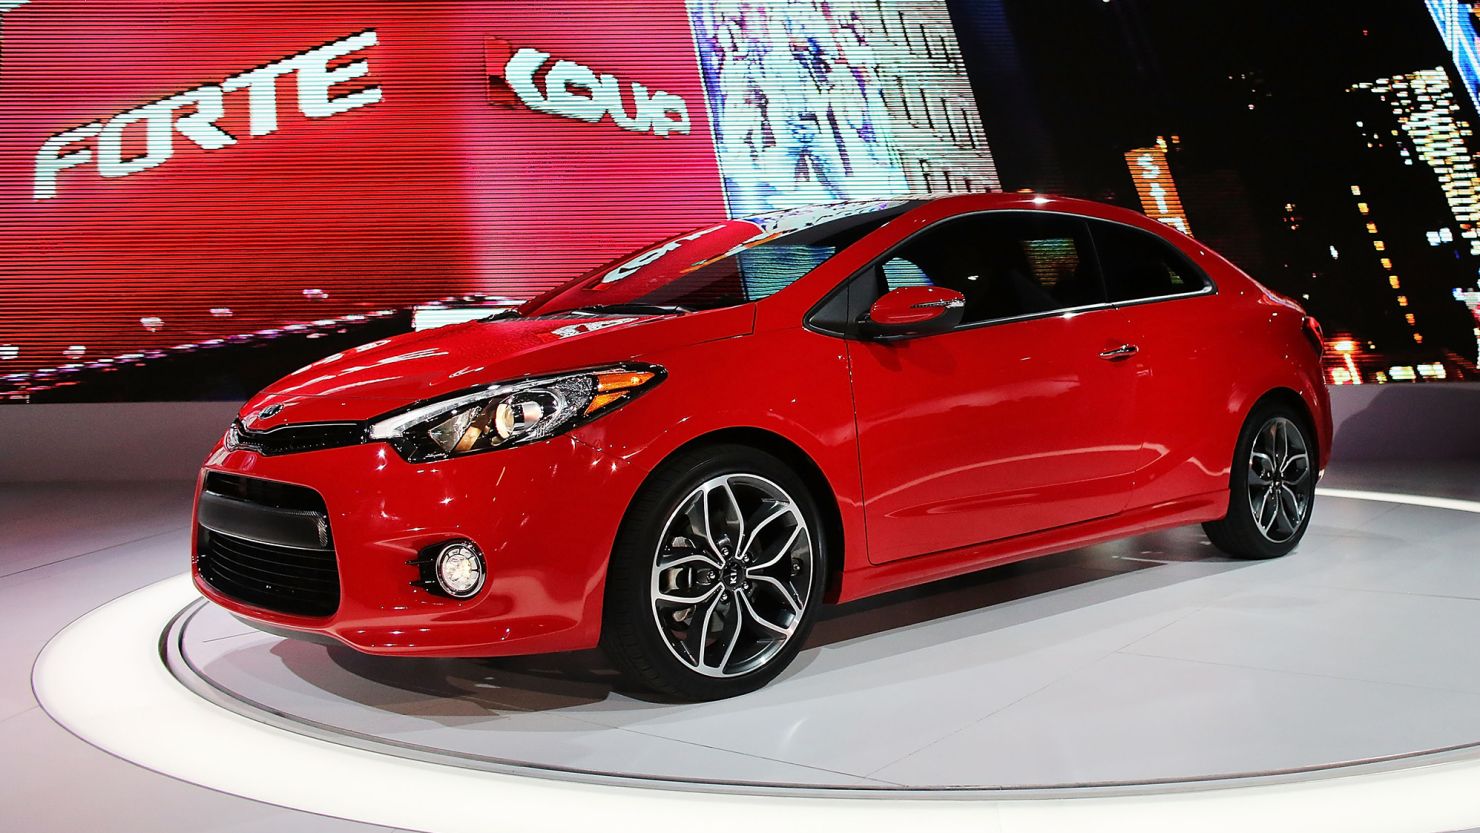 Kia is recalling 295,000 US vehicles because of engine fire risks CNN